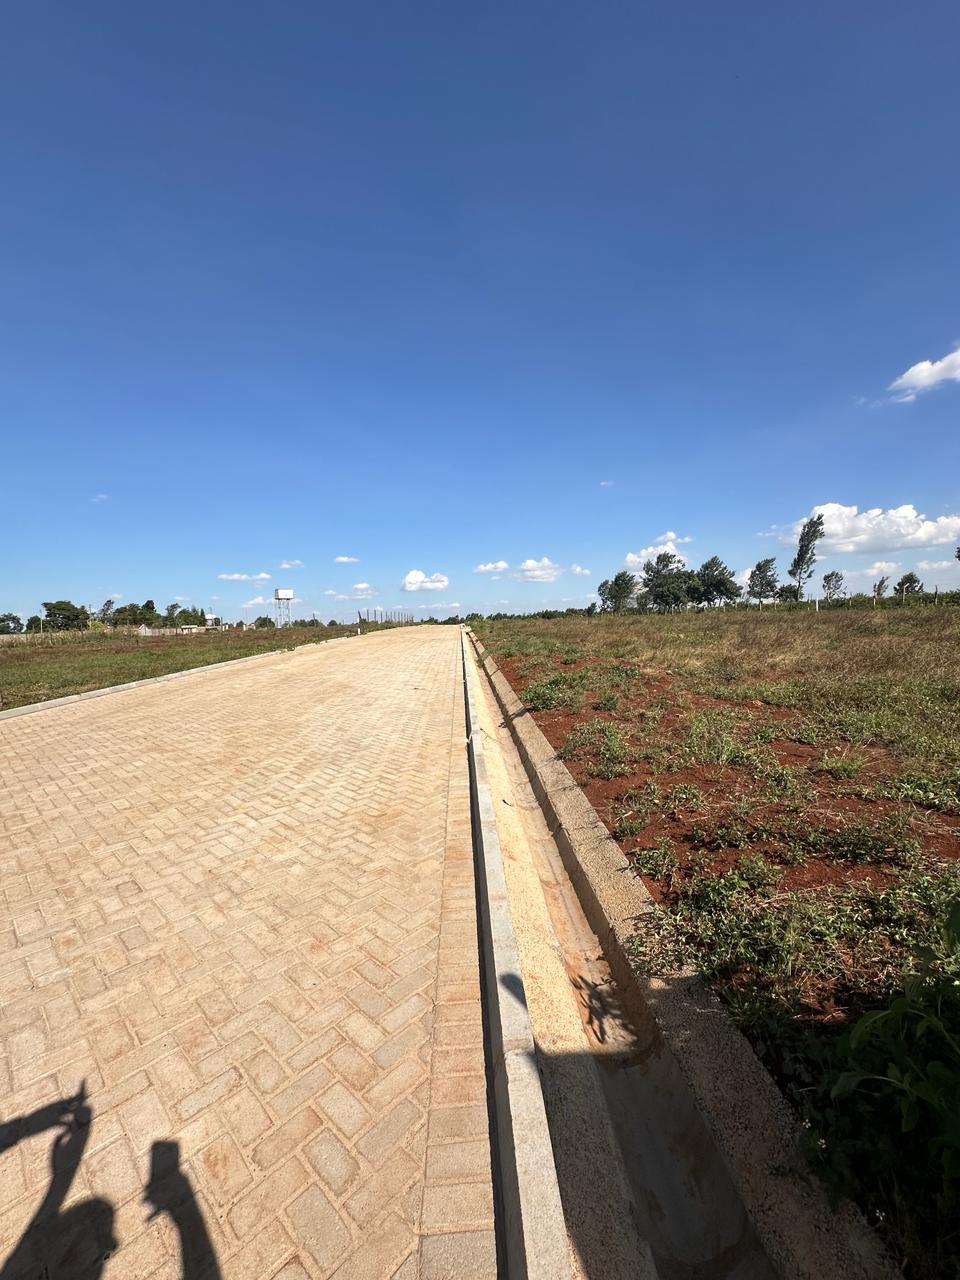 Scenic Prime Land For Sale in Runda. Located in a gated community, with a cabro paved driveway and a ready title deed. Asking Price. 40 M. Musilli Homes.